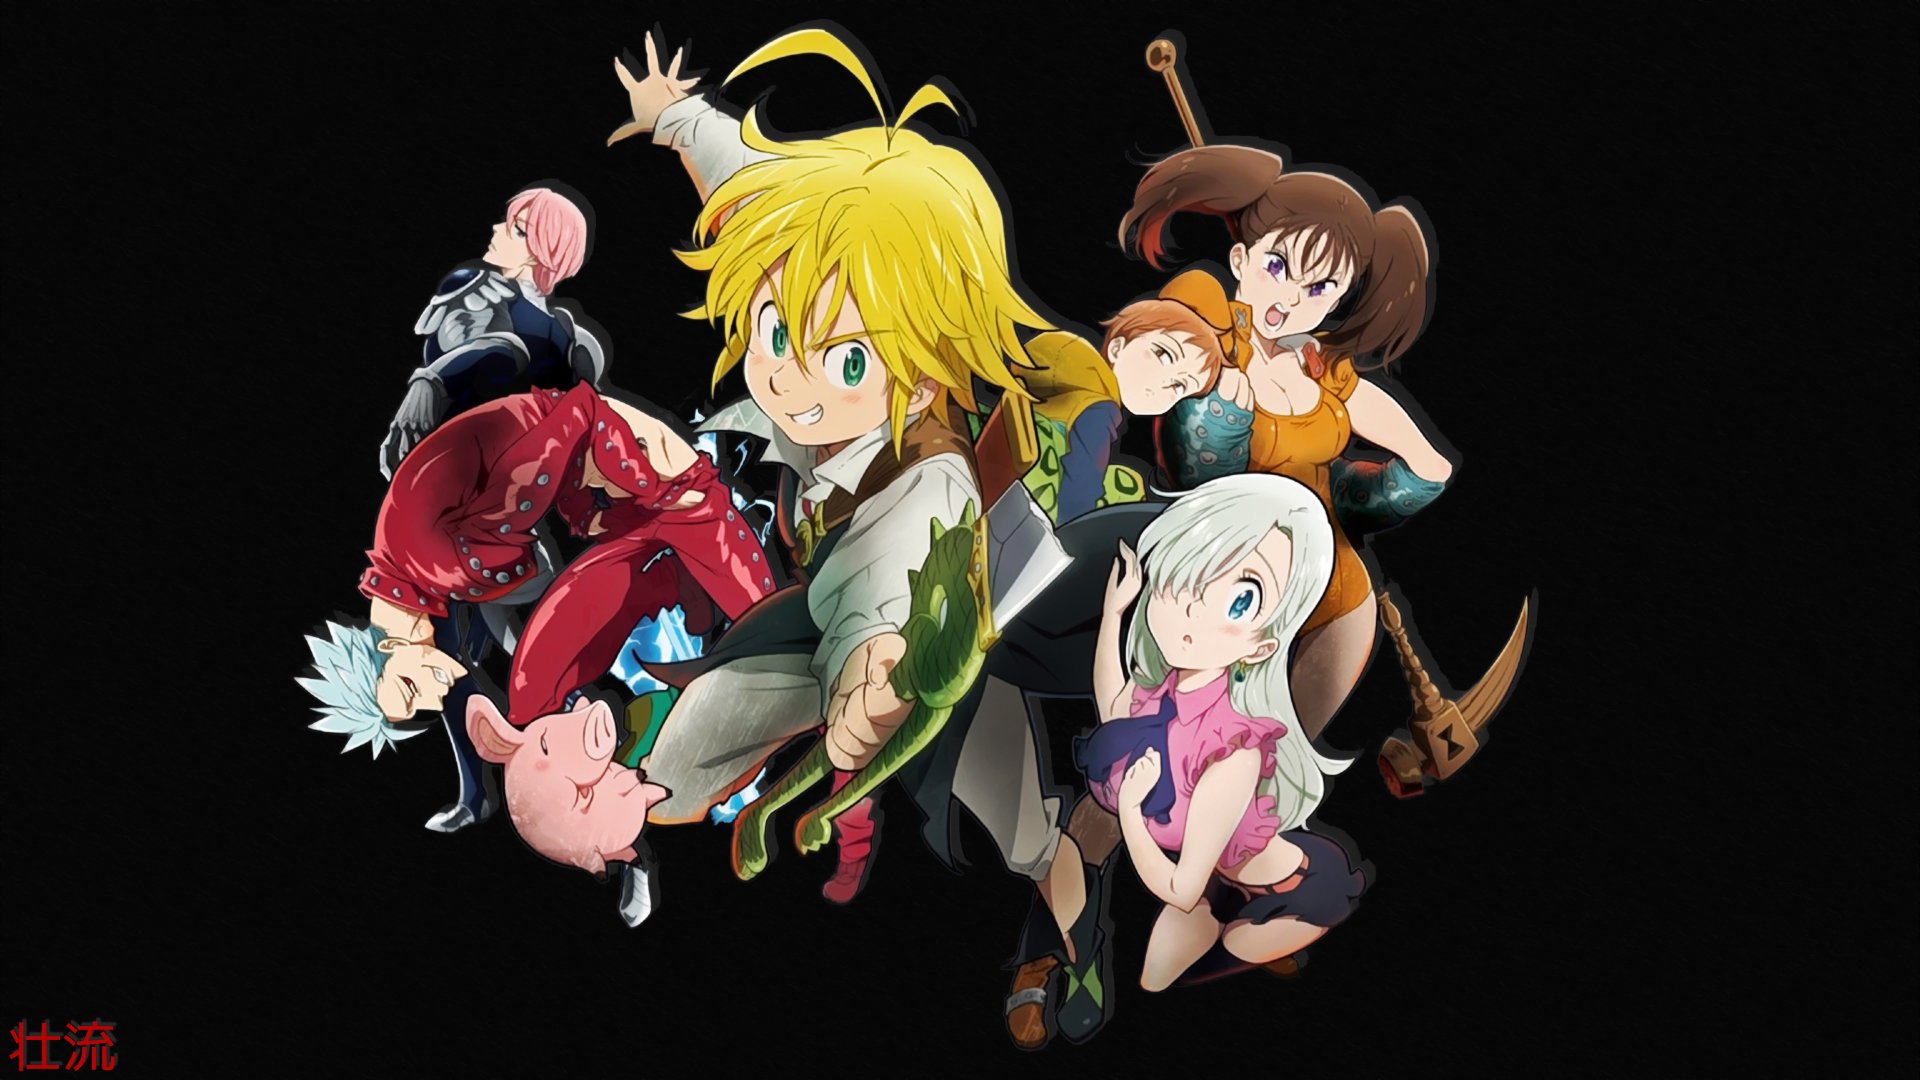 4K Gilthunder (The Seven Deadly Sins) Wallpapers Background Images.